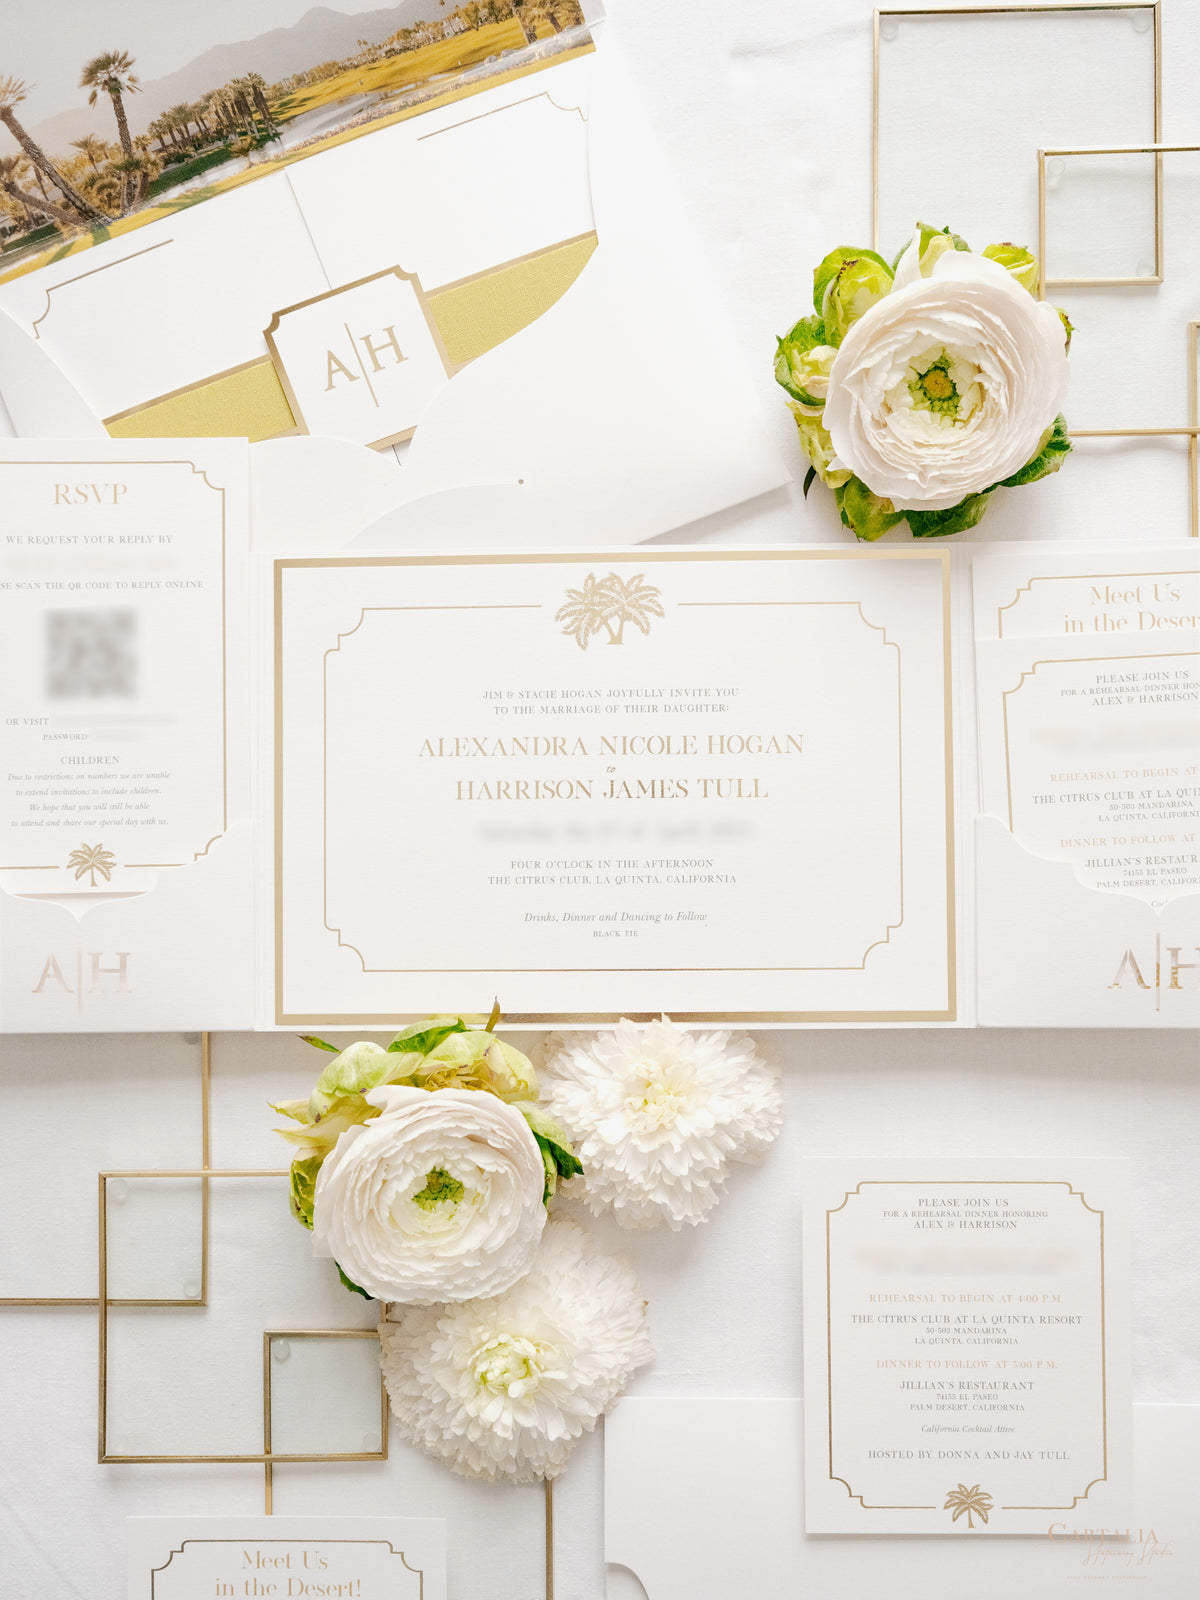 Luxurious Pocket Invitation with Gold Foil Monogram & Belly Band | Bespoke Commission A&H